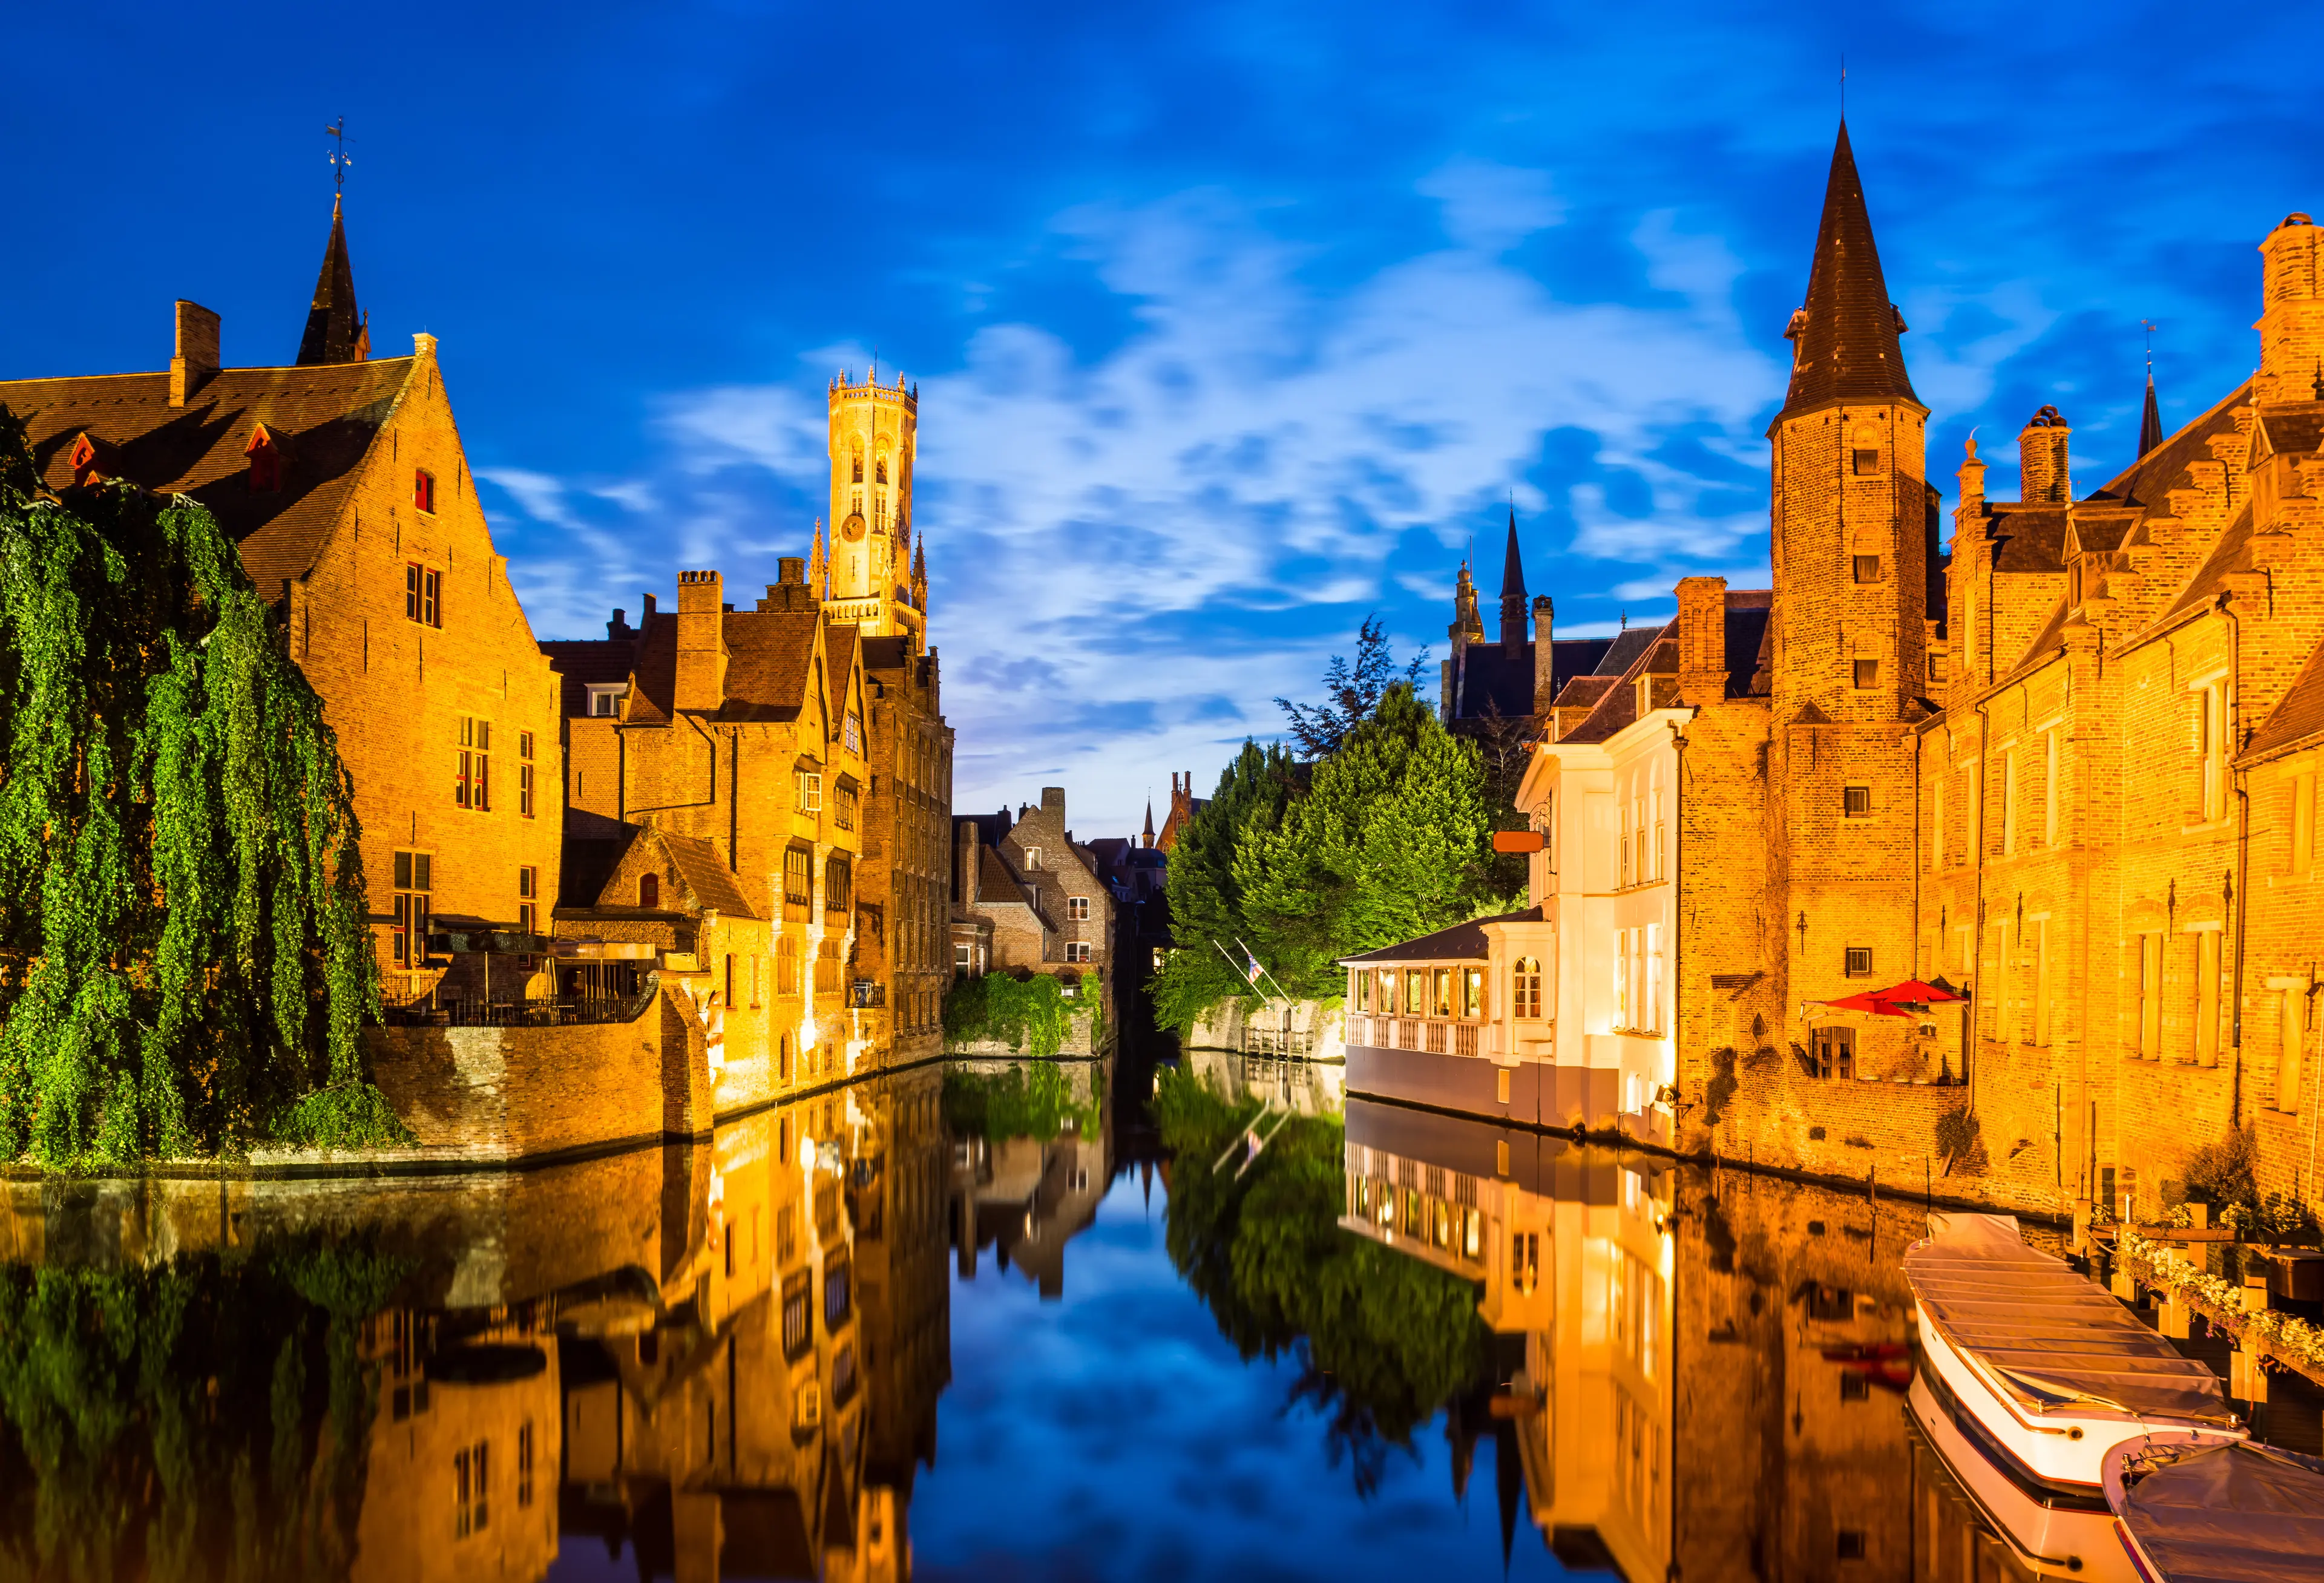 2-Day Family Local Experience: Shopping, Food & Sightseeing in Bruges